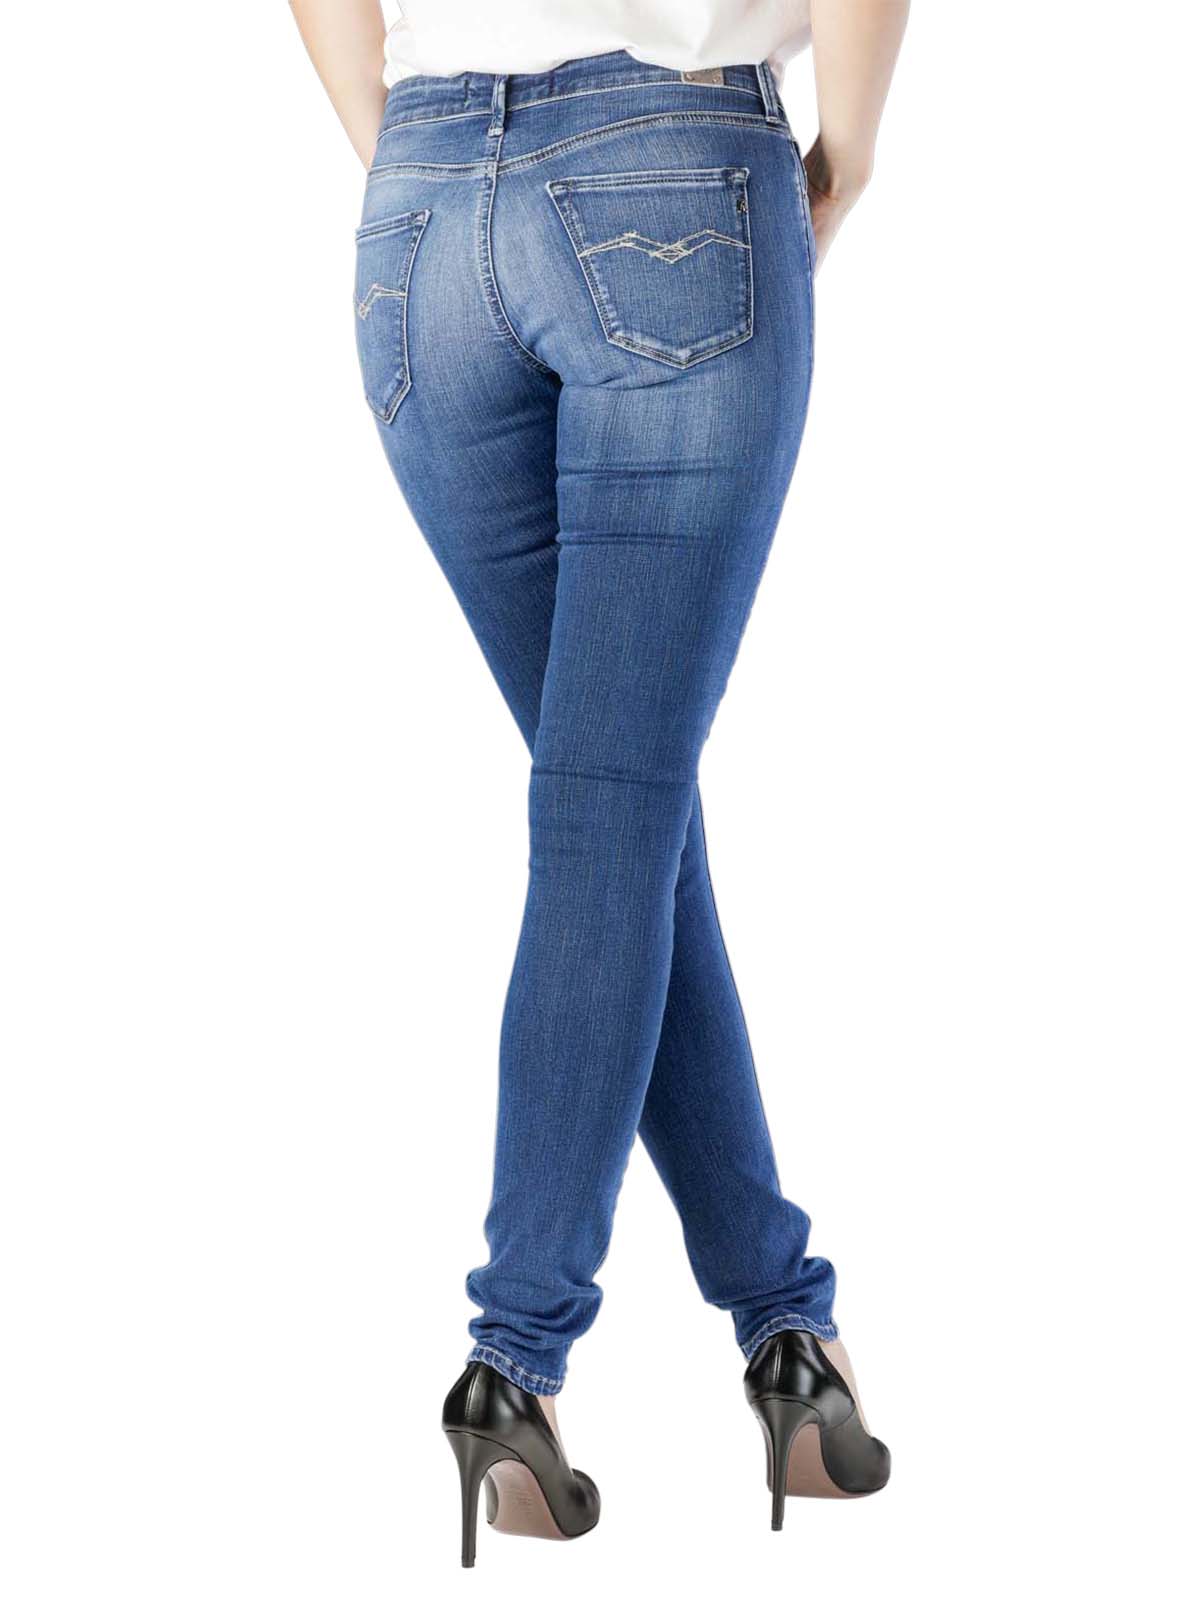 hemel ethisch geloof Replay Luz Jeans Skinny Fit A06 Replay Women's Jeans | Free Shipping on  BEBASIC.CH - SIMPLY LOOK GOOD